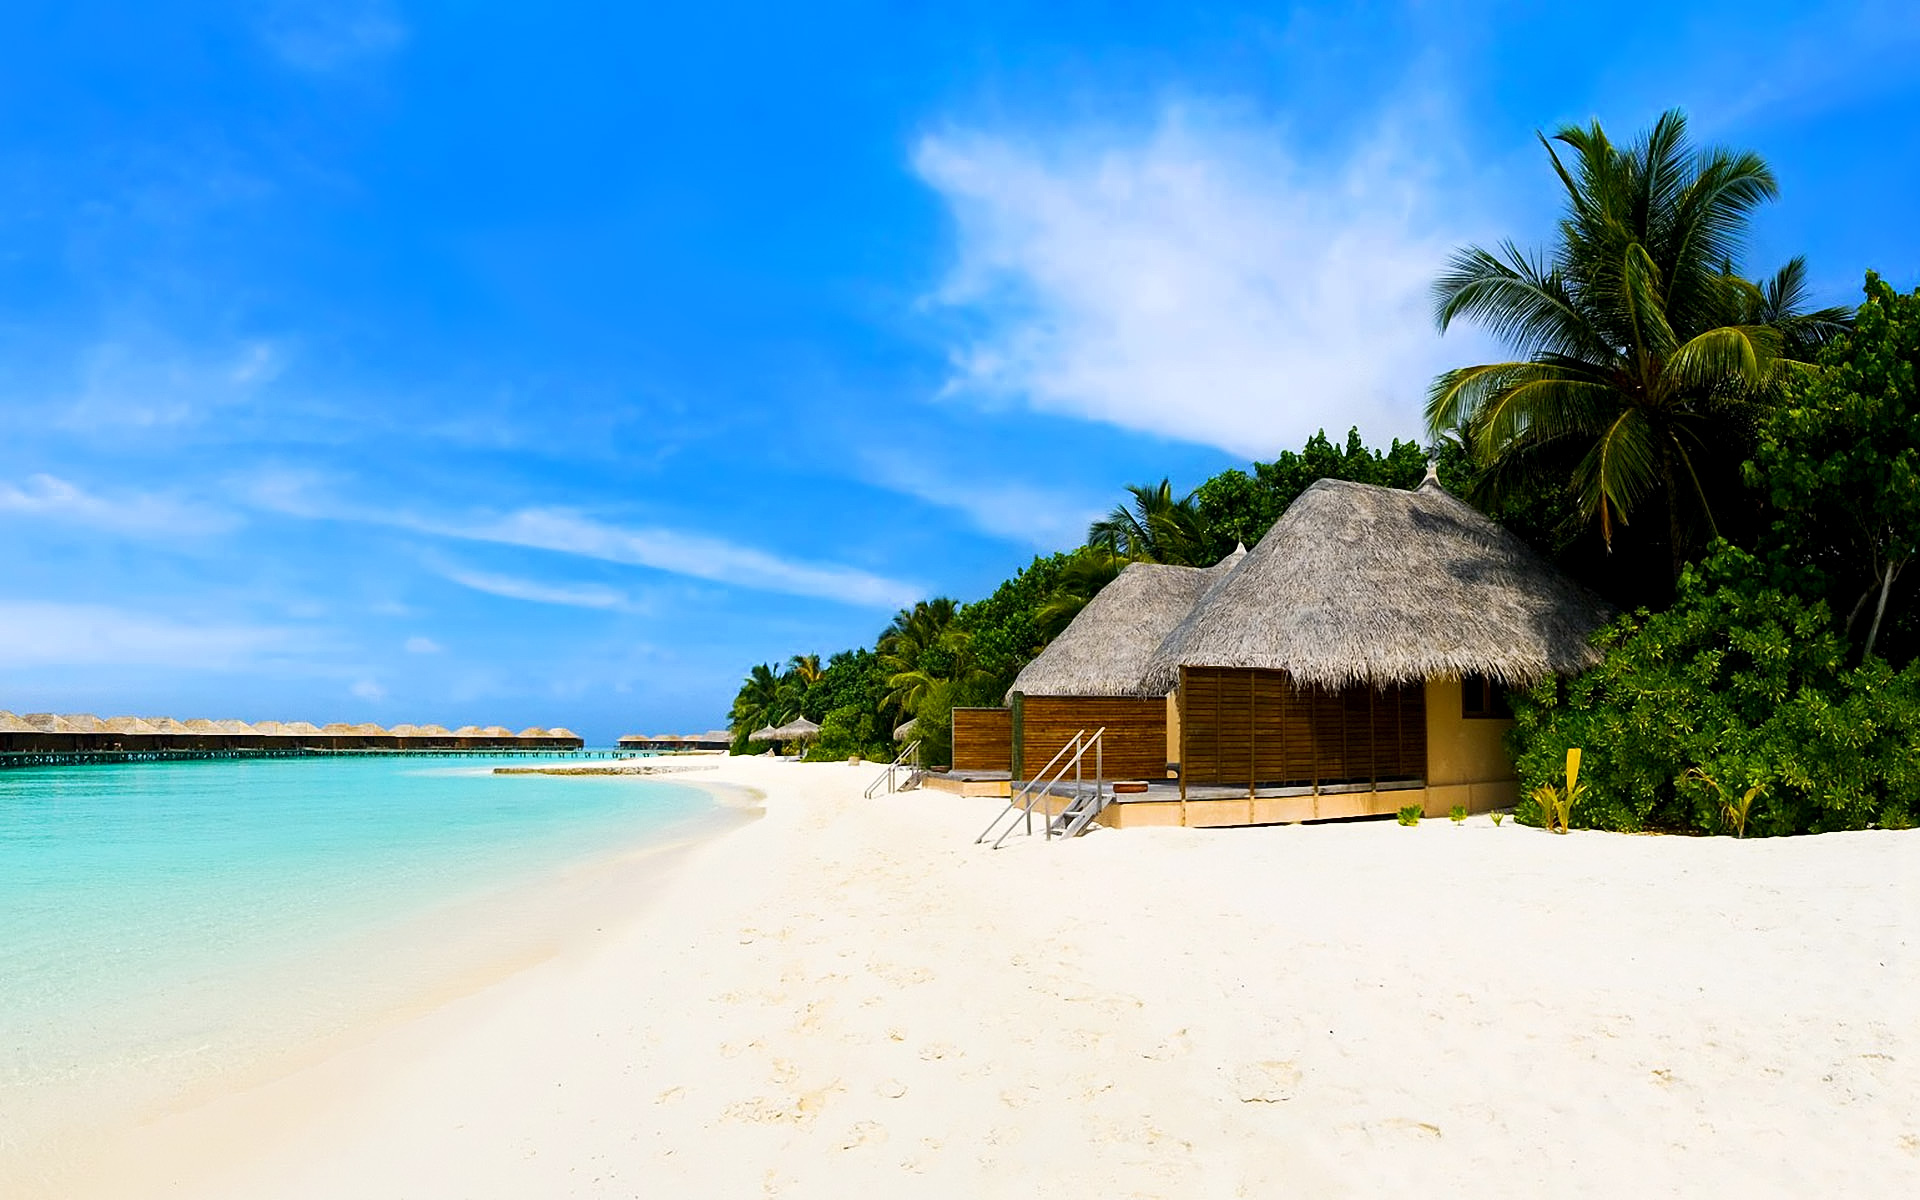 Beach bungalows on the tropical island wallpaper   Beach Wallpapers